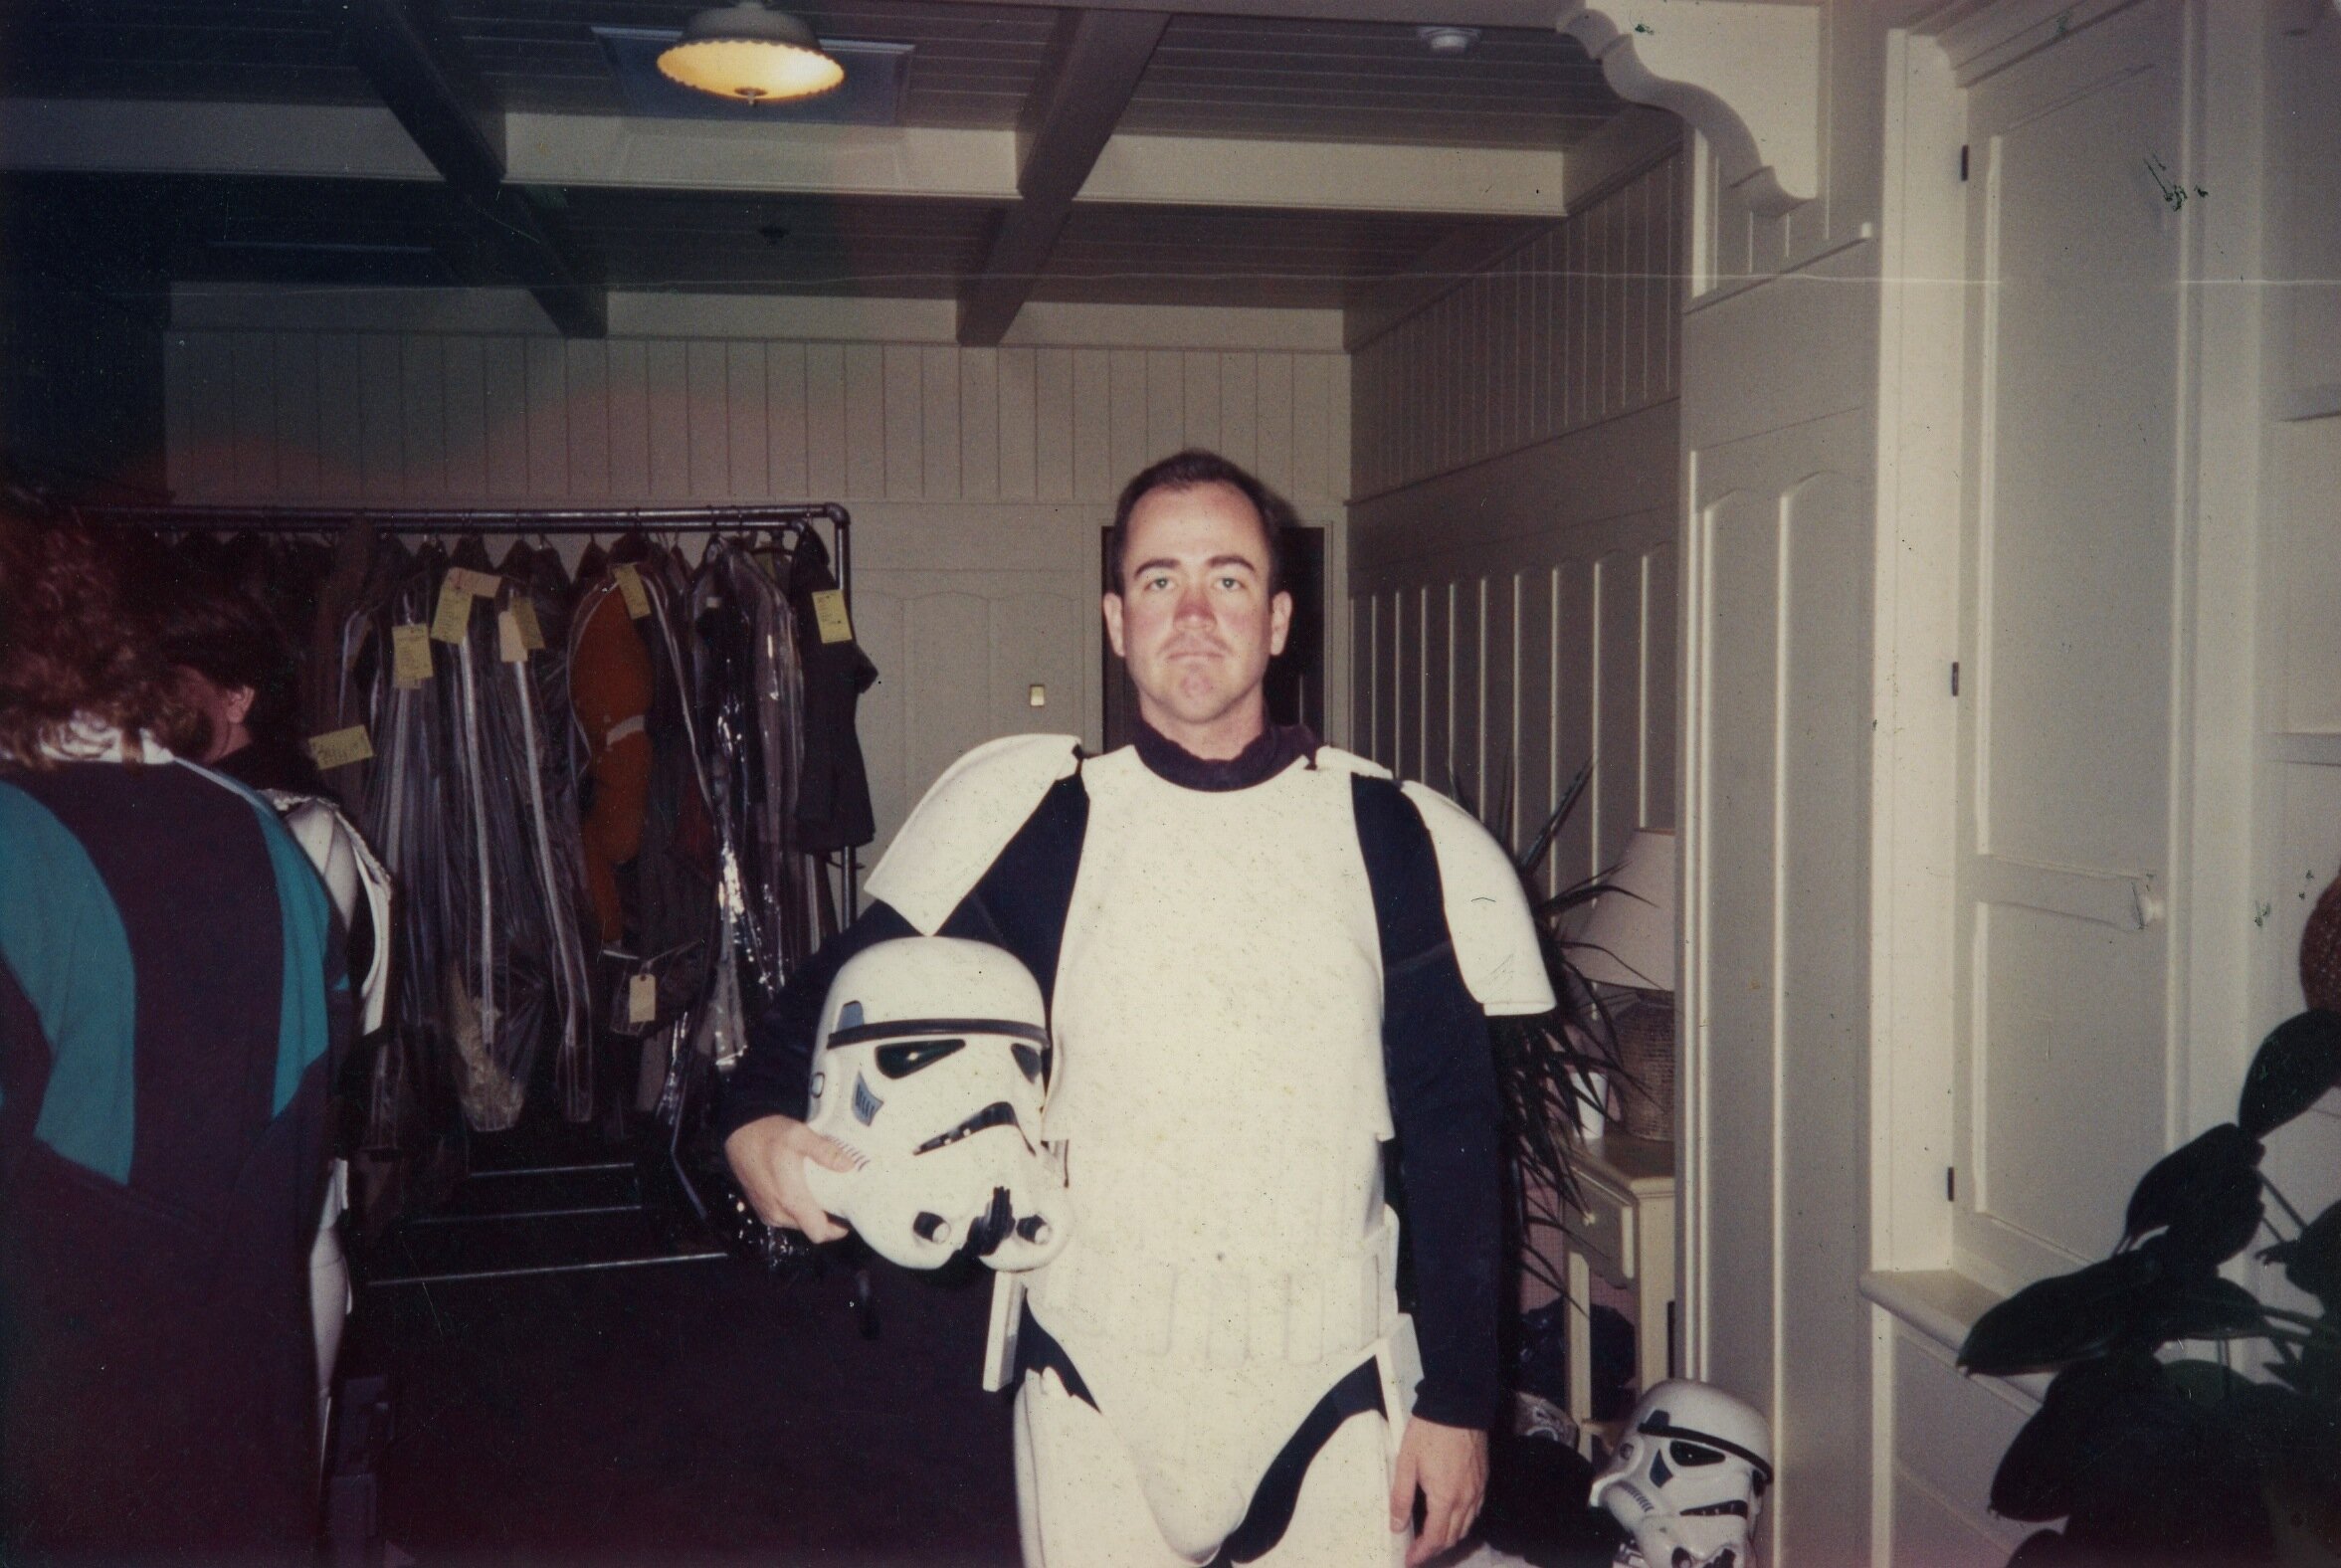  Costume fitting at Skywalker Ranch for insert shots on Star Wars: Special Edition.  